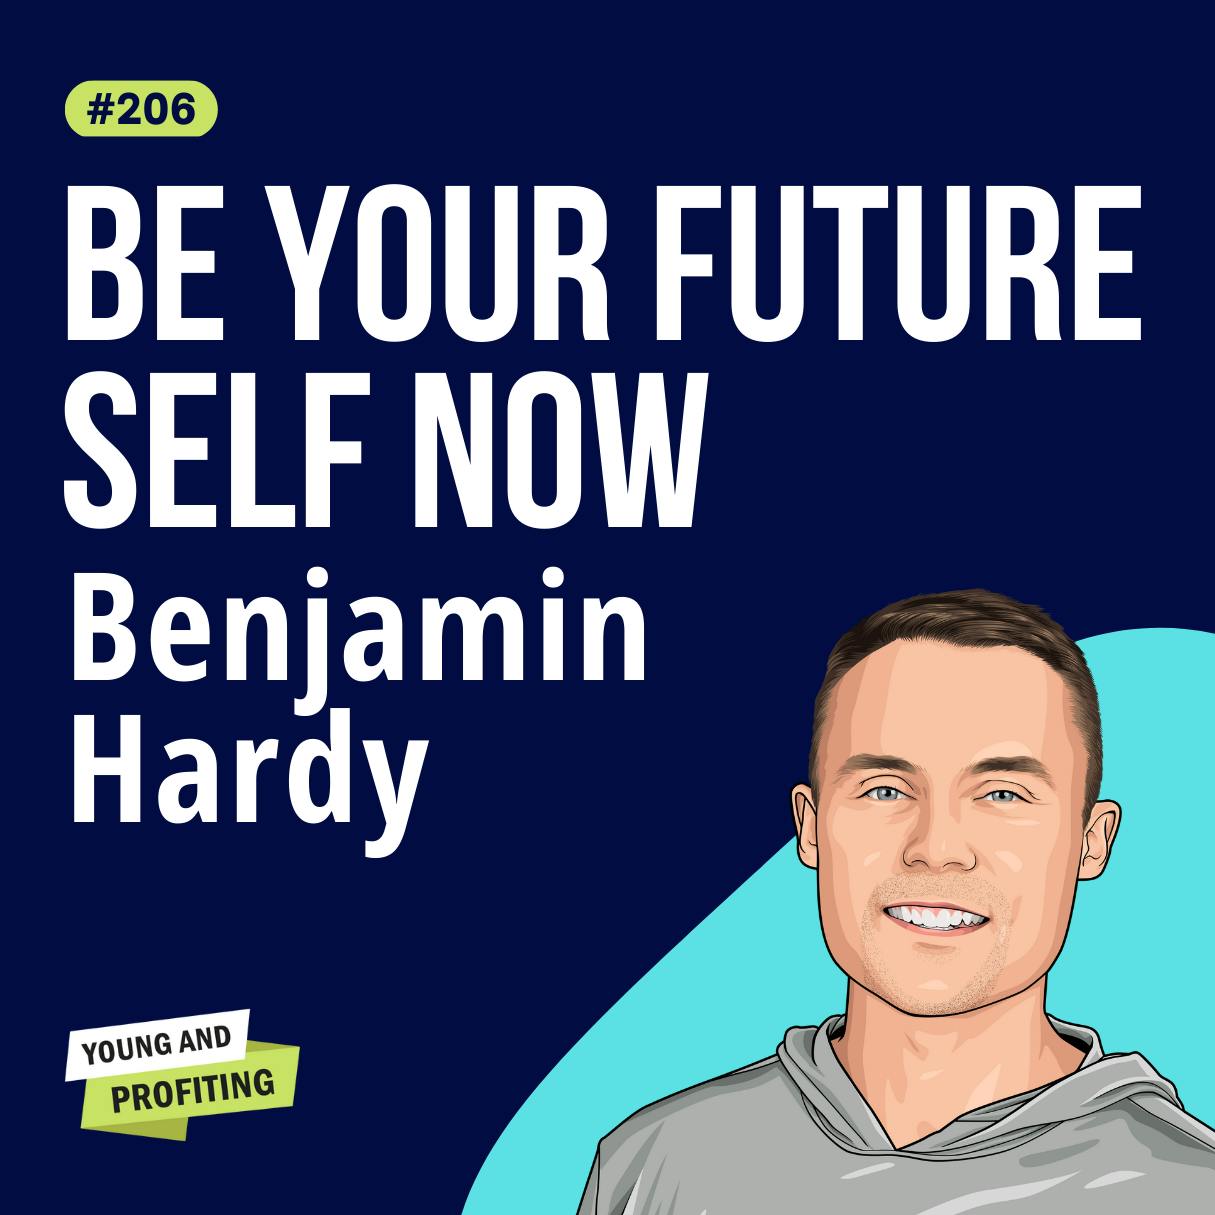 Benjamin Hardy: The #1 Personal Growth Hack in 2023, How to Change Your Identity and Make Better Choices | E206 by Hala Taha | YAP Media Network